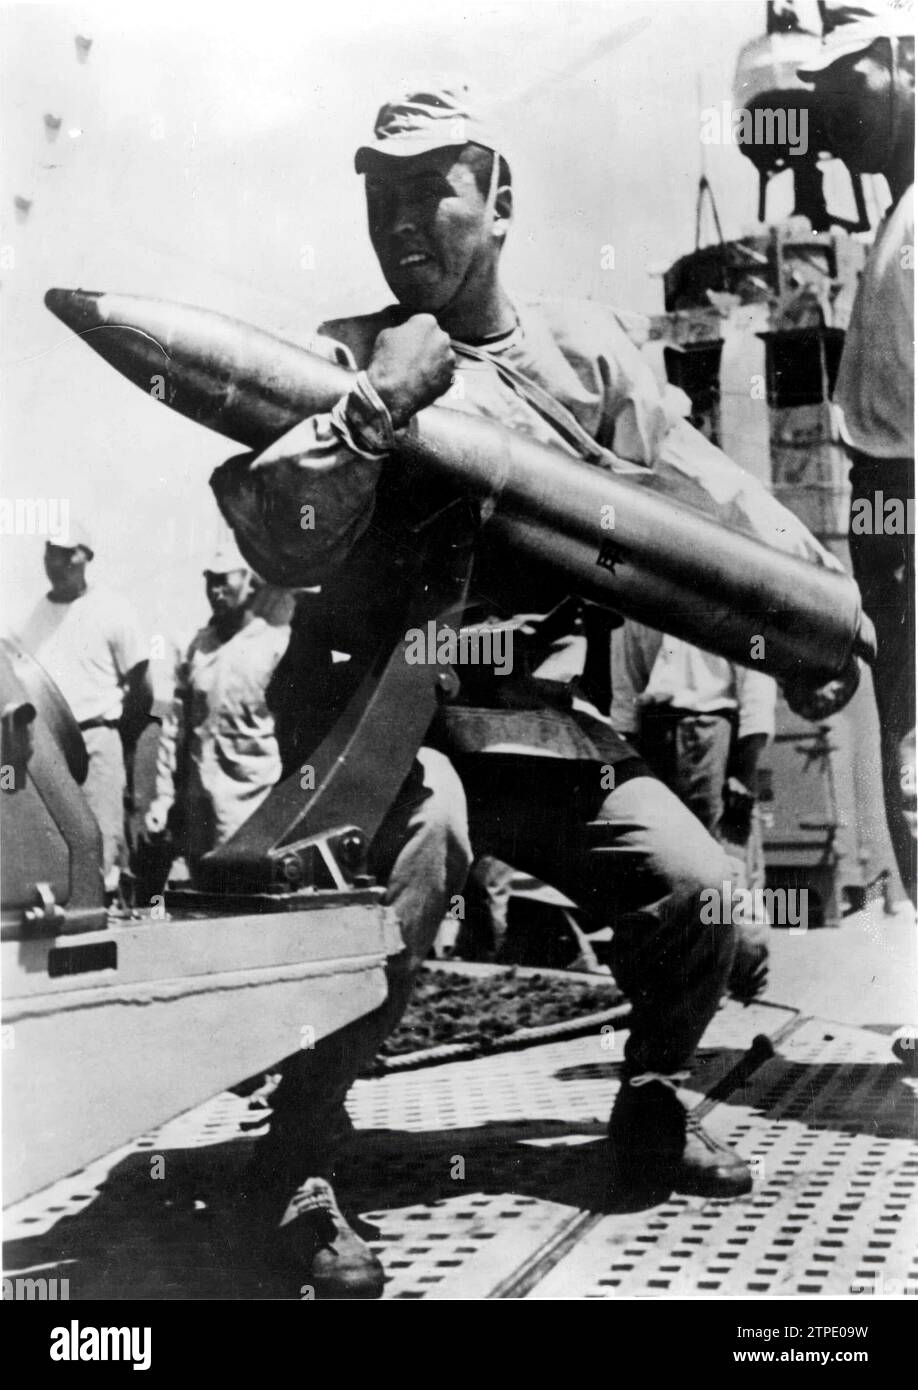 12/31/1941. Japanese sailor in action aboard a warship during the Naval Battle of the Solomon Islands. Credit: Album / Archivo ABC / Transocean Stock Photo